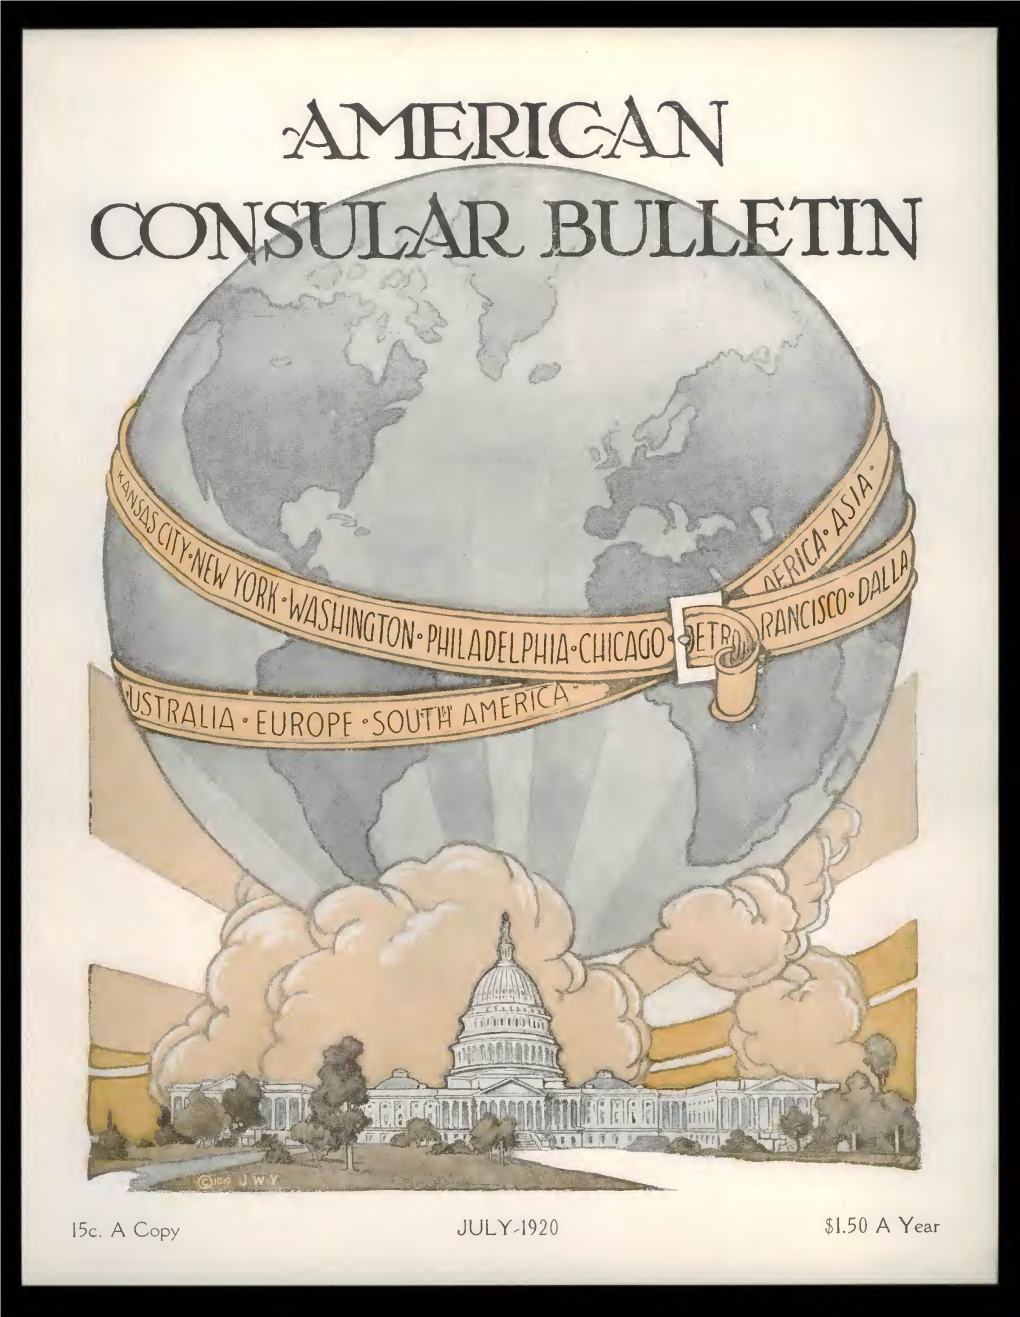 The Foreign Service Journal, July 1920 (American Consular Bulletin)